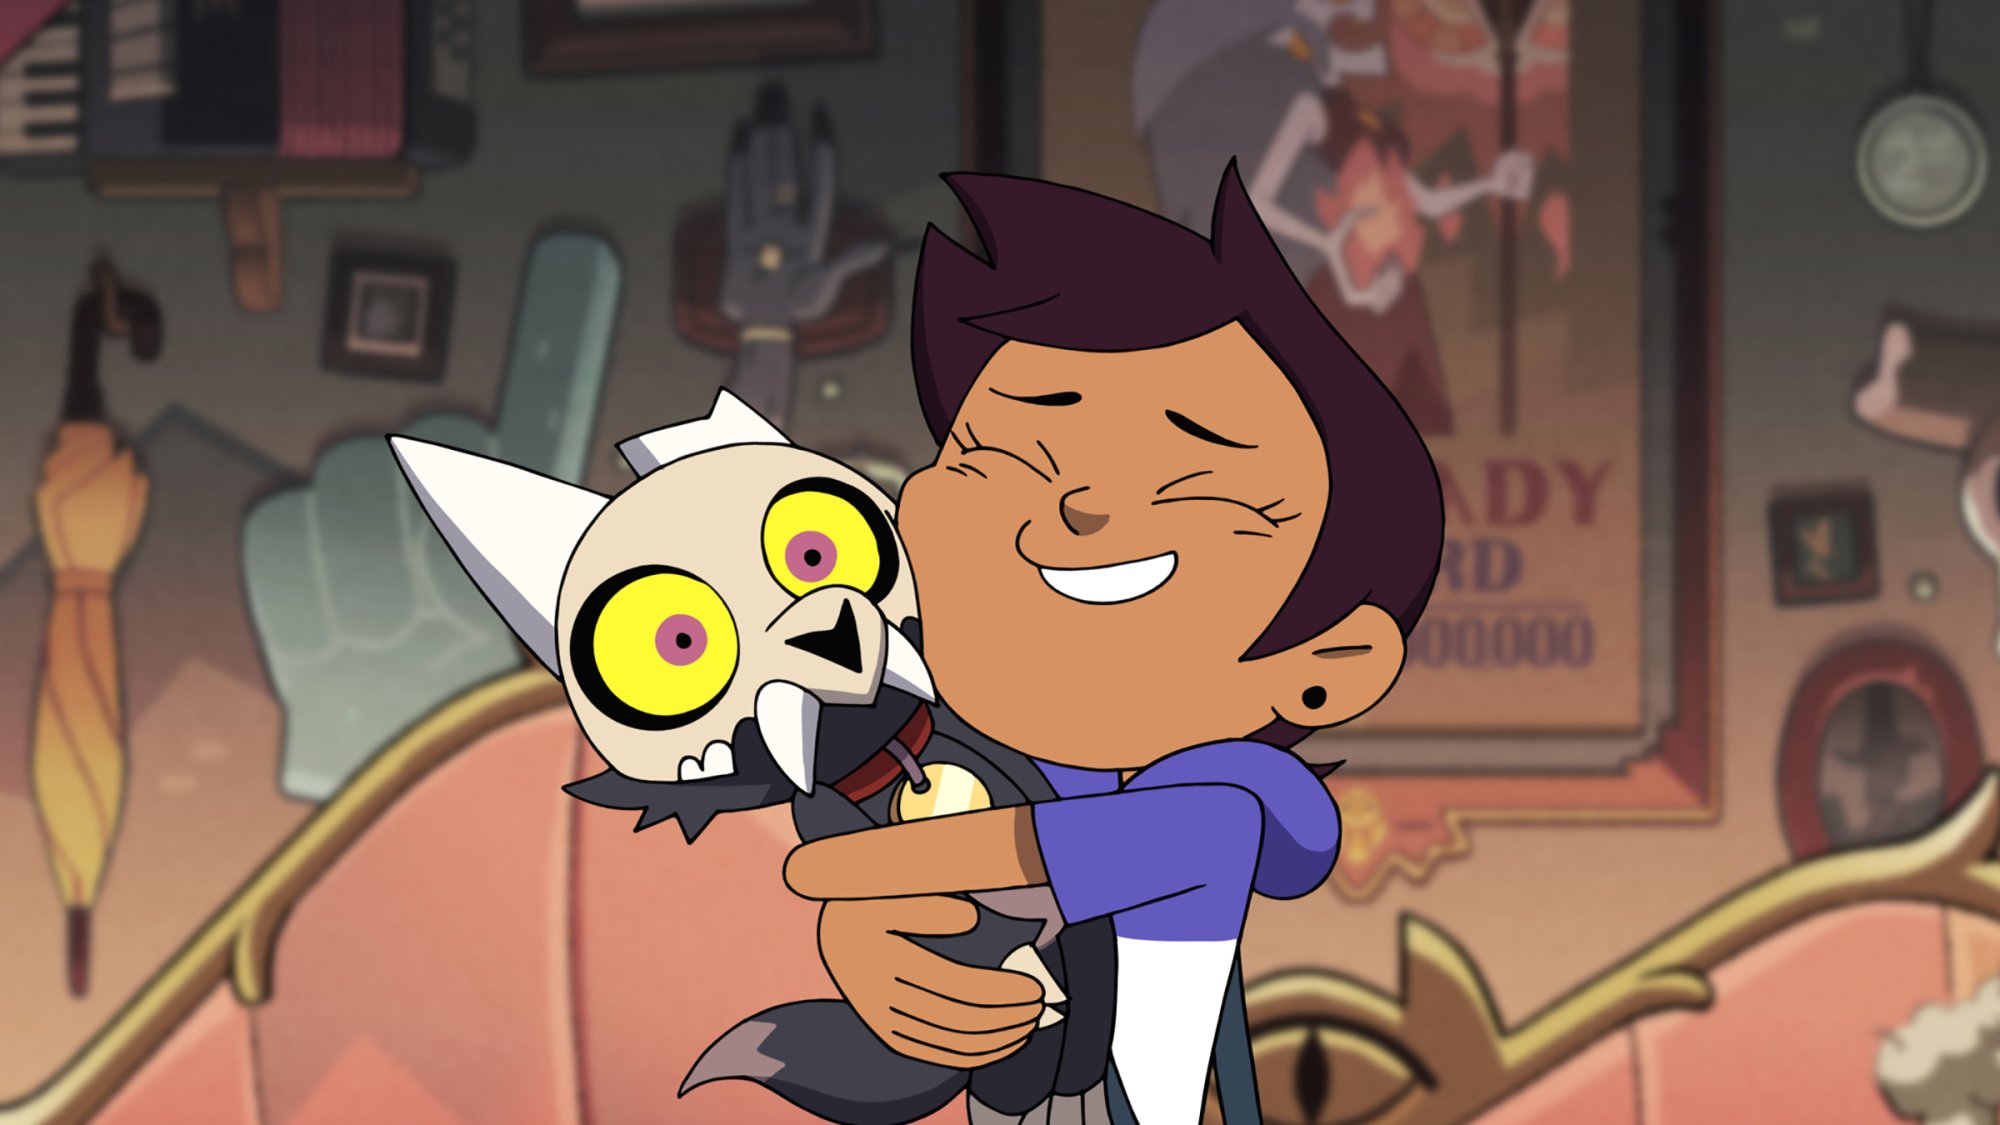 A cartoon girl with short brown hair tightly hugs a cat-like creature wearing a fanged mask.